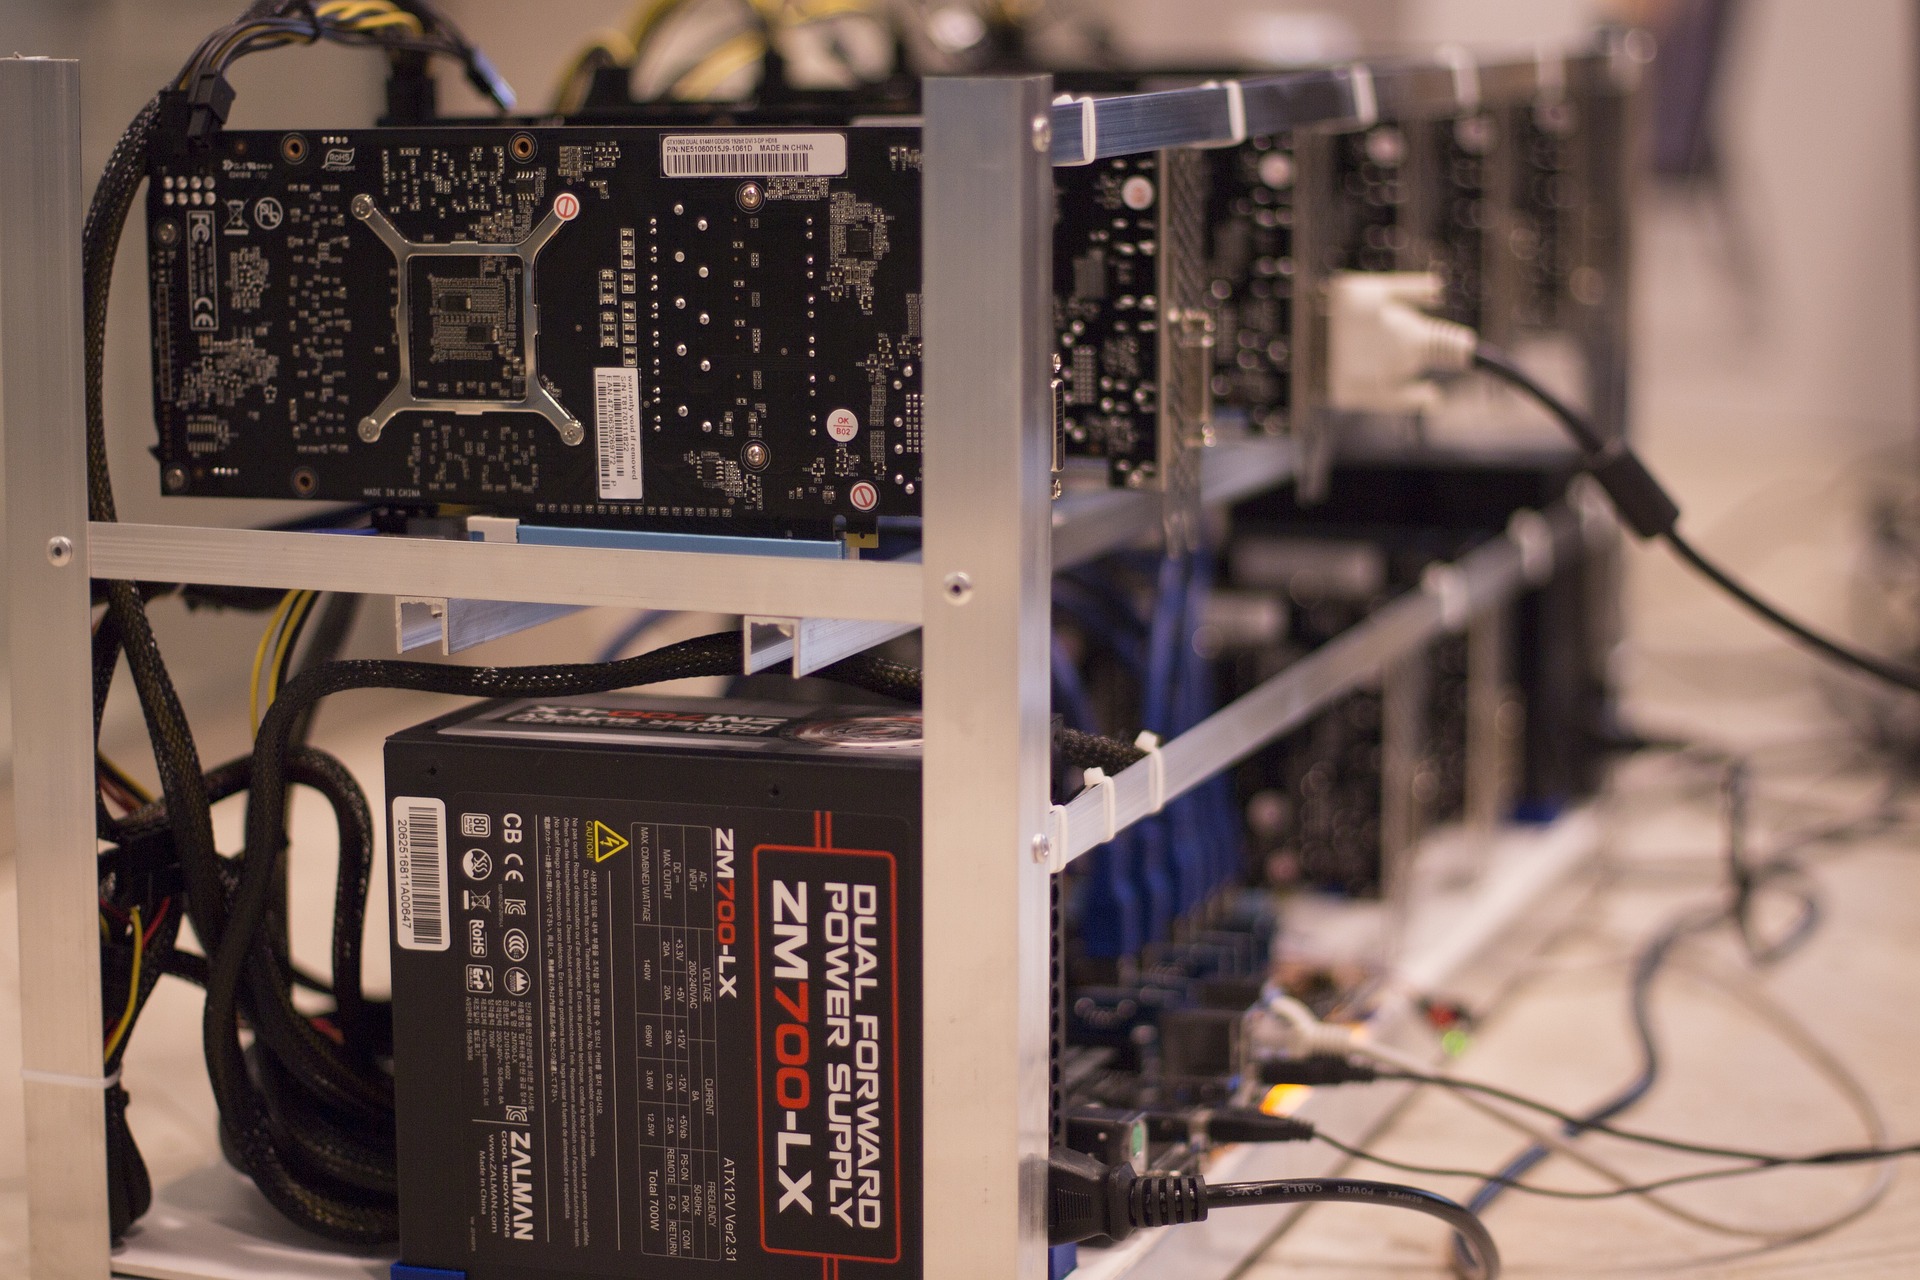 50% of Bitcoin hashrate Controlled by Two Mining Pools